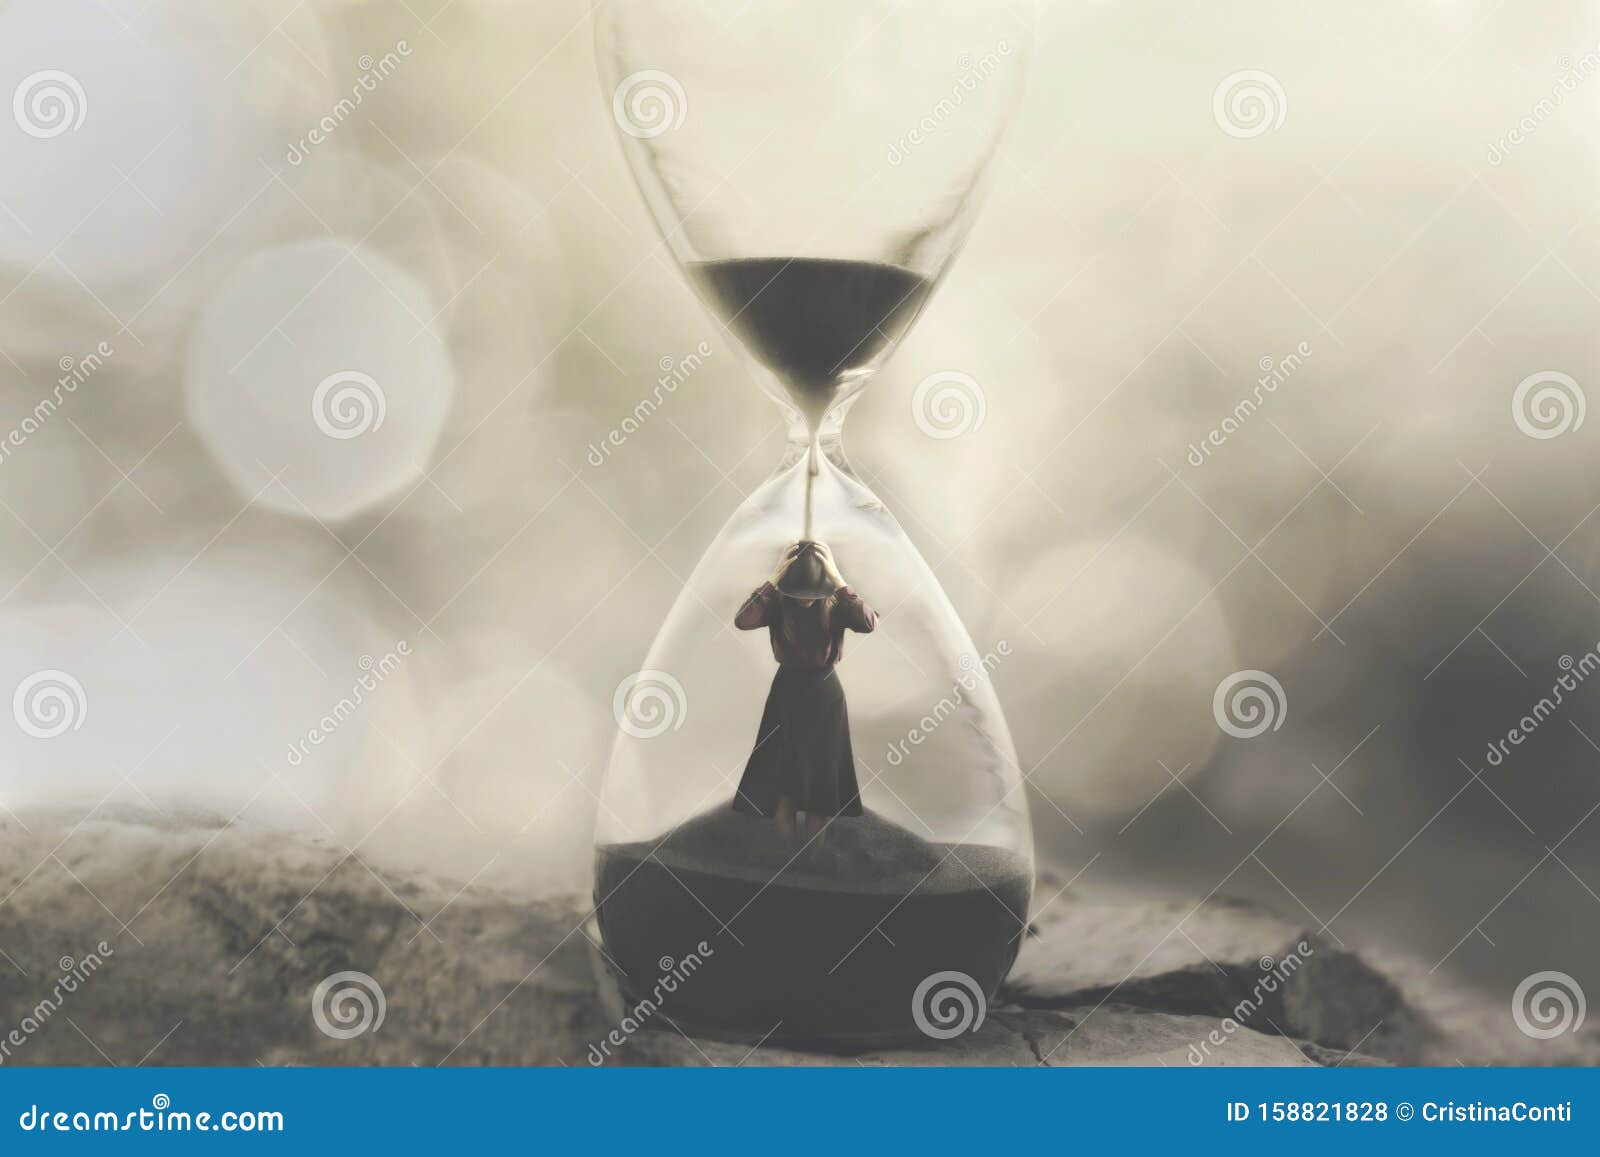 woman stuck in an hourglass, concept of being prisoners of time passing